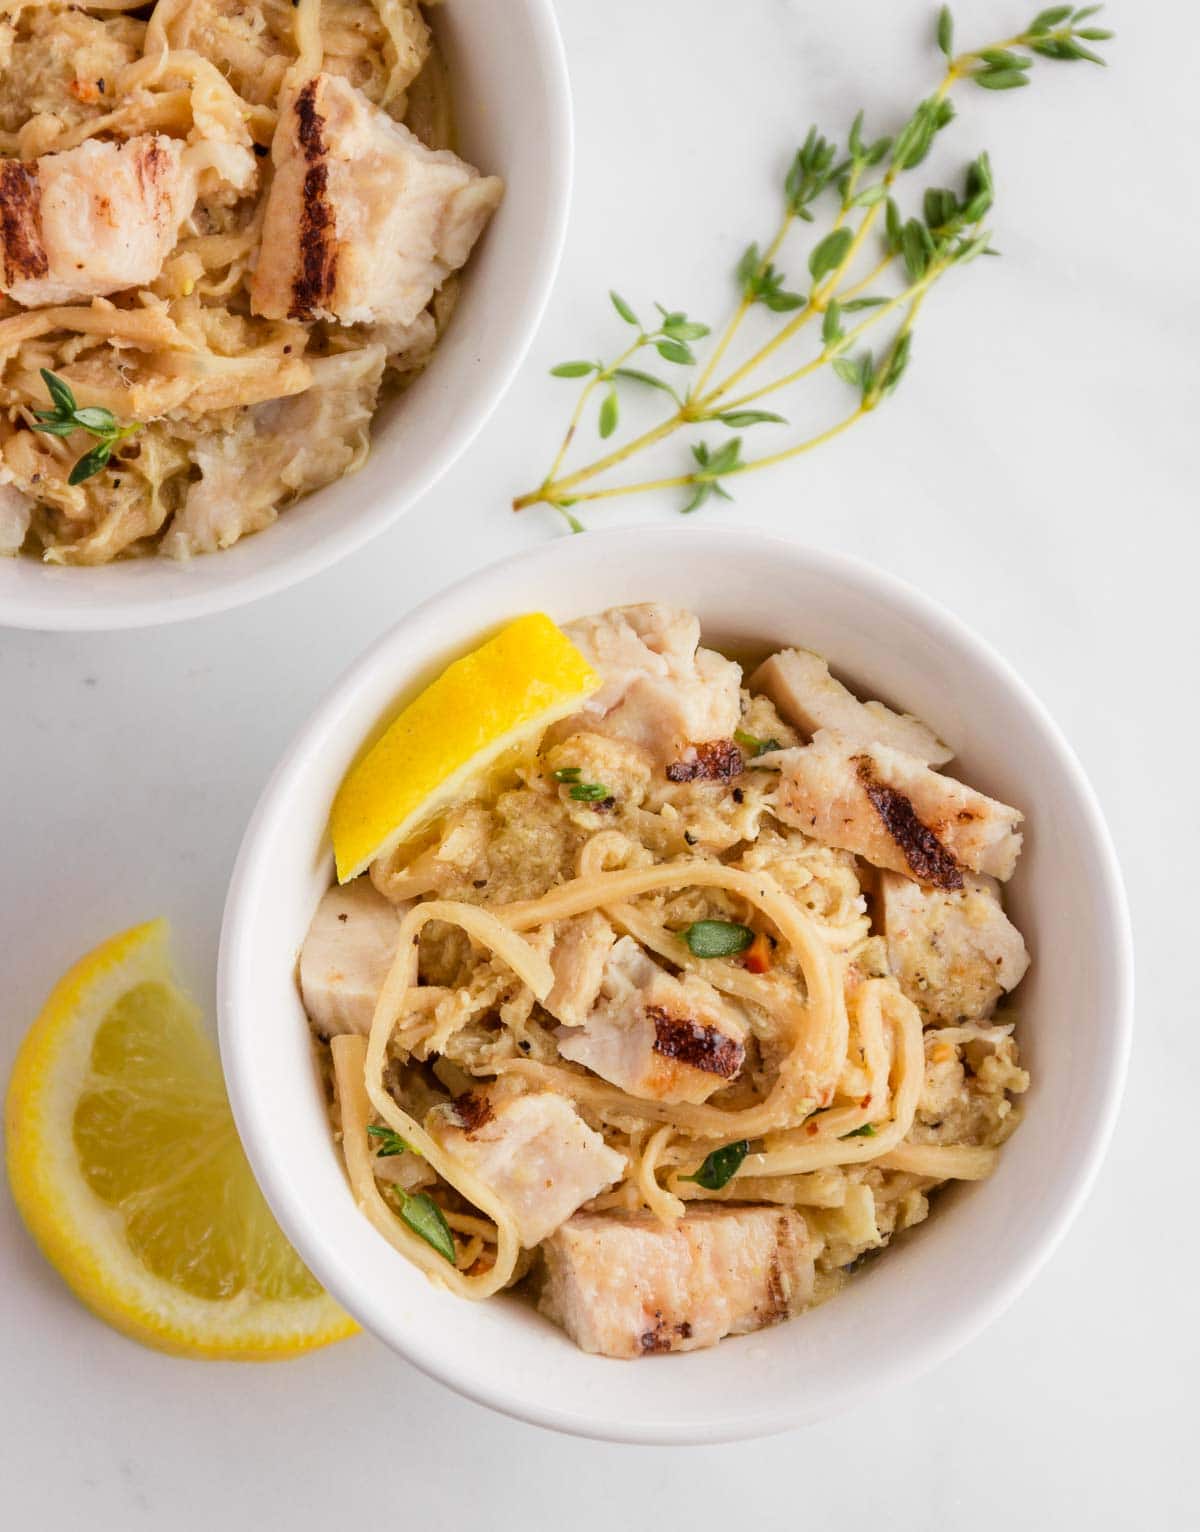 Low carb hearts of palm noodles with chicken and veggies in a lemon butter cream sauce.